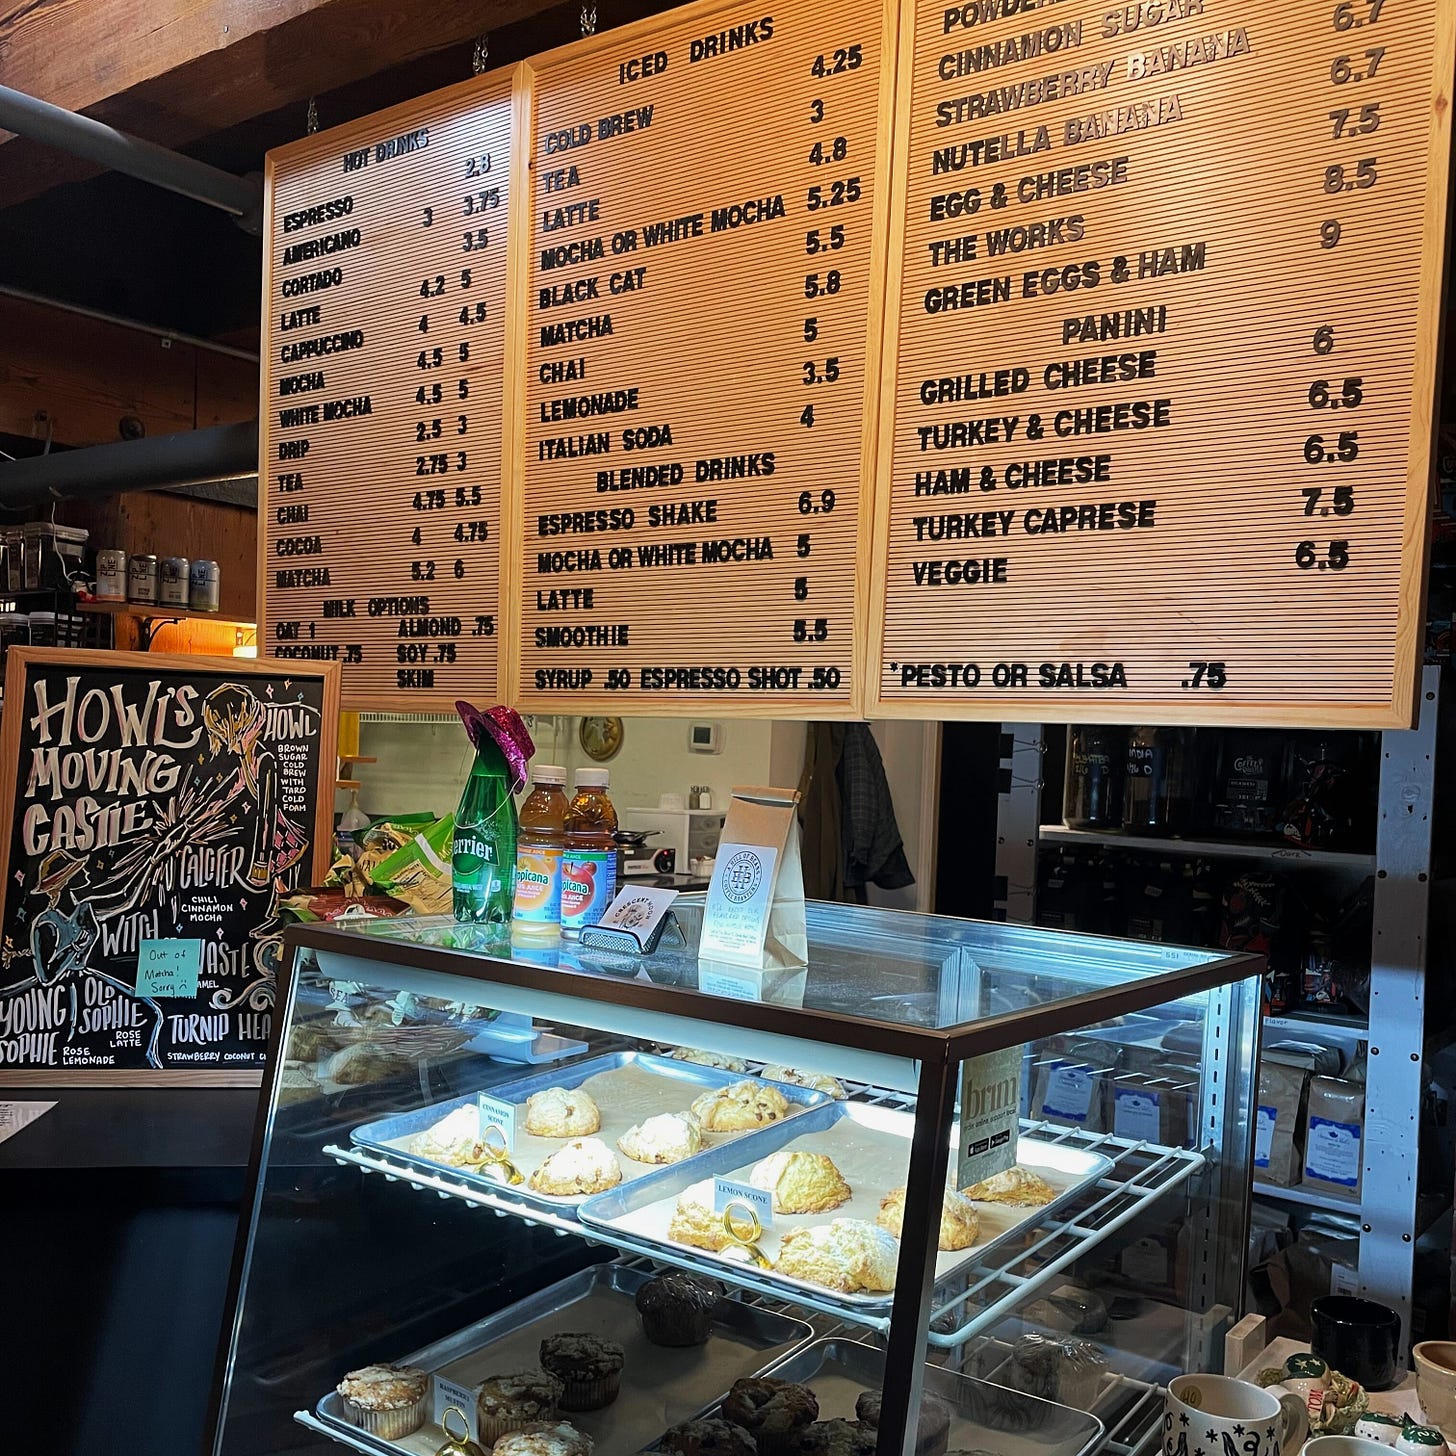 Drink Menus and Baked Goods At Crescent Moon Coffee in Lincoln, Nebraska